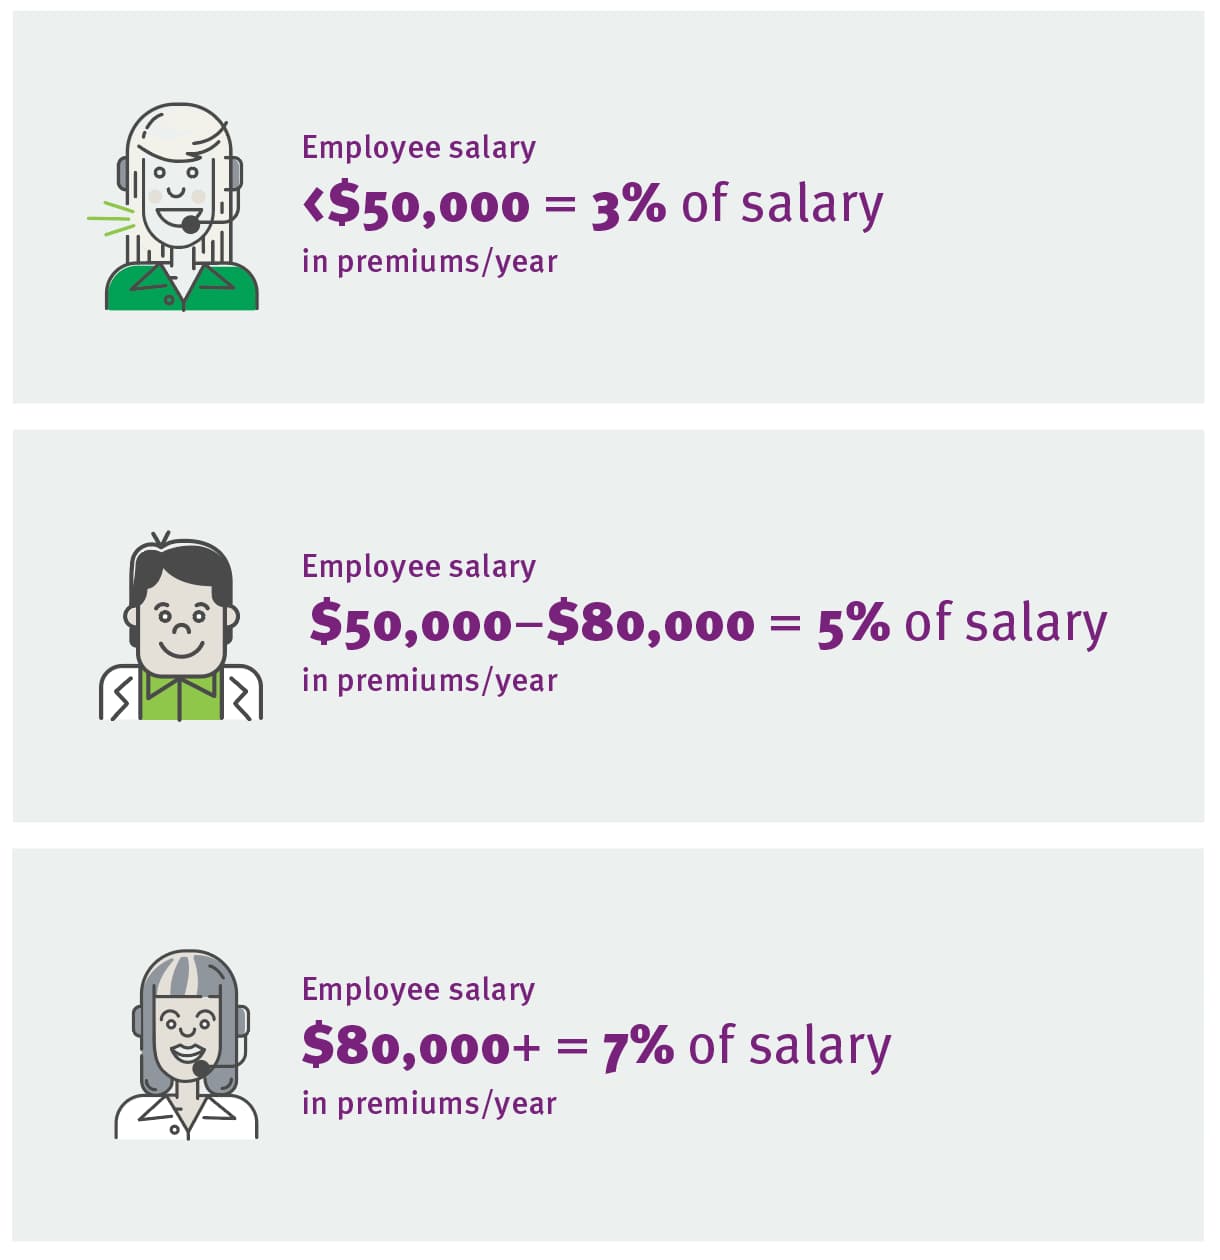 Employee salary 
<$50,000 = 3% of salary 
in premiums/year

Employee salary $50,000–$80,000 = 5% of salary 
in premiums/year

Employee salary 
$80,000+ = 7% of salary 
in premiums/year